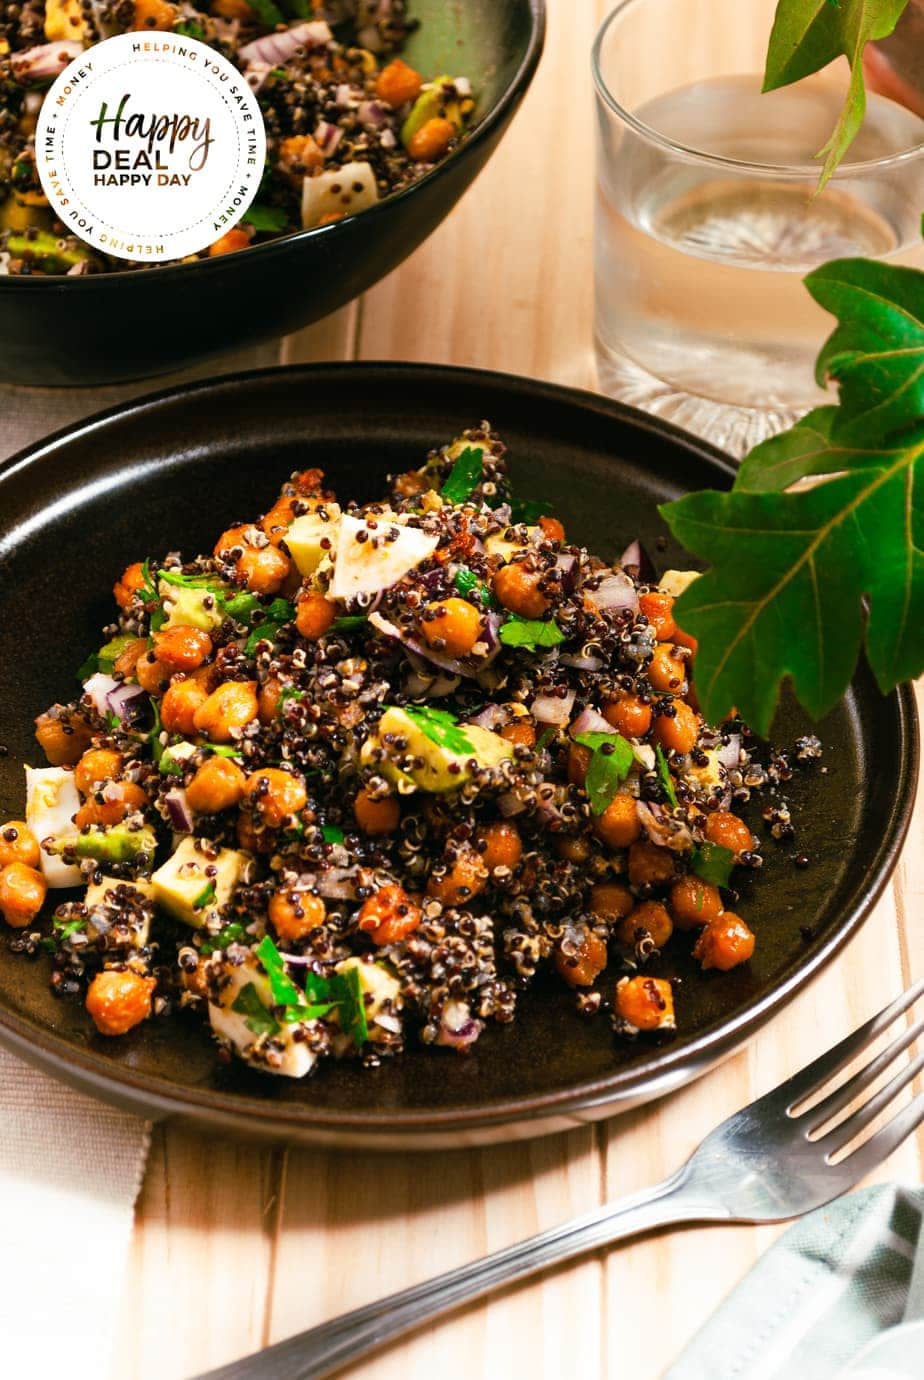 Quinoa Salad with Chickpeas - Happy Deal - Happy Day!